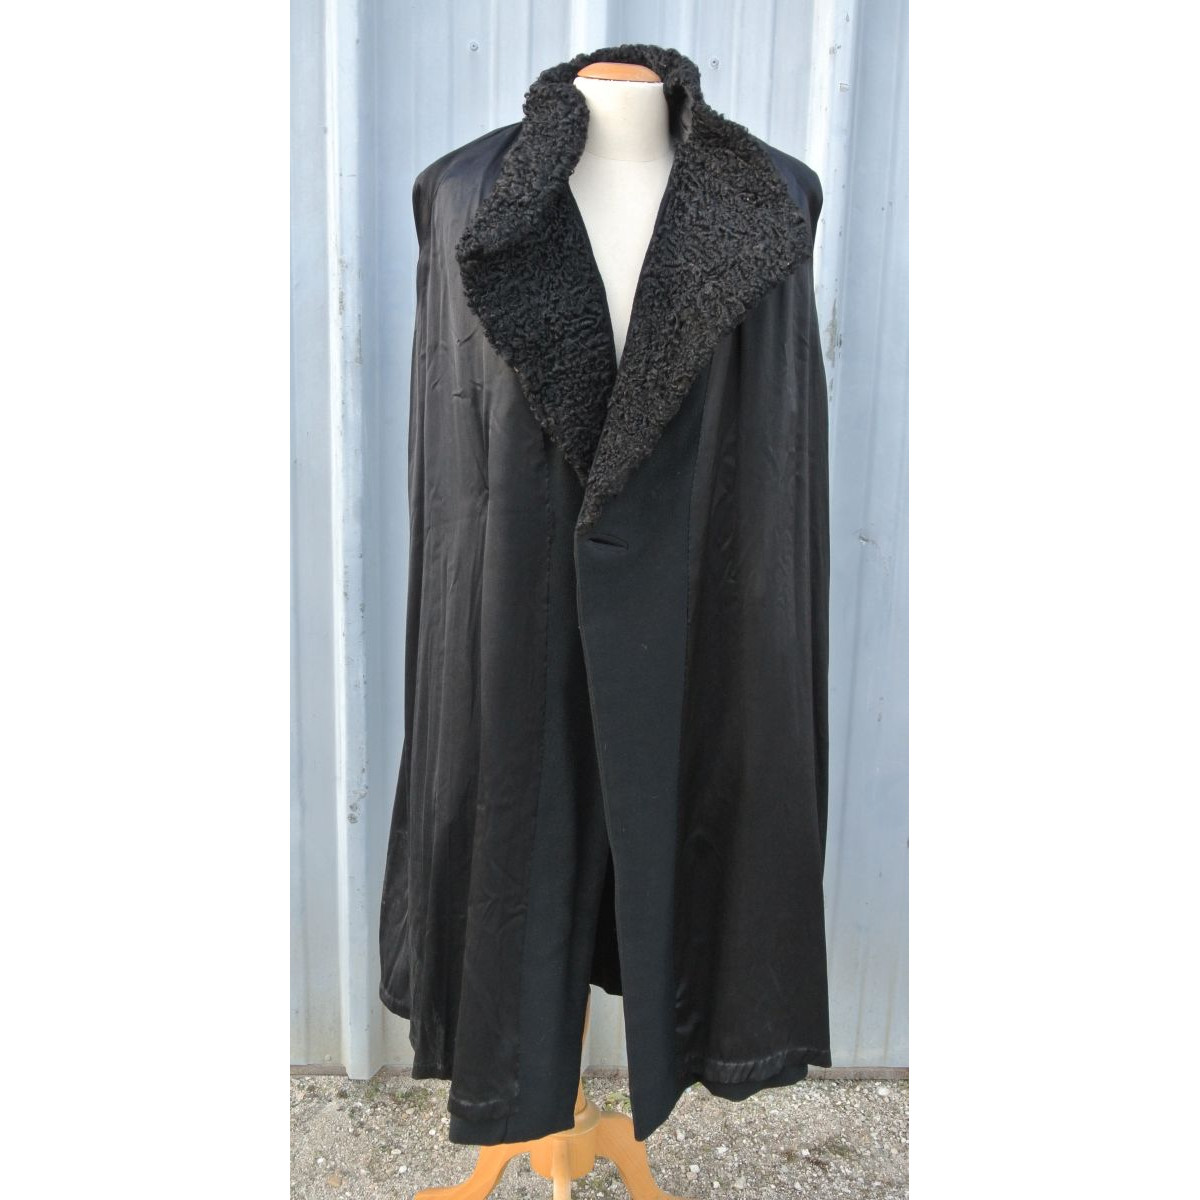 Nice VINTAGE coat with real astrakhan collar - Le palais des bricoles